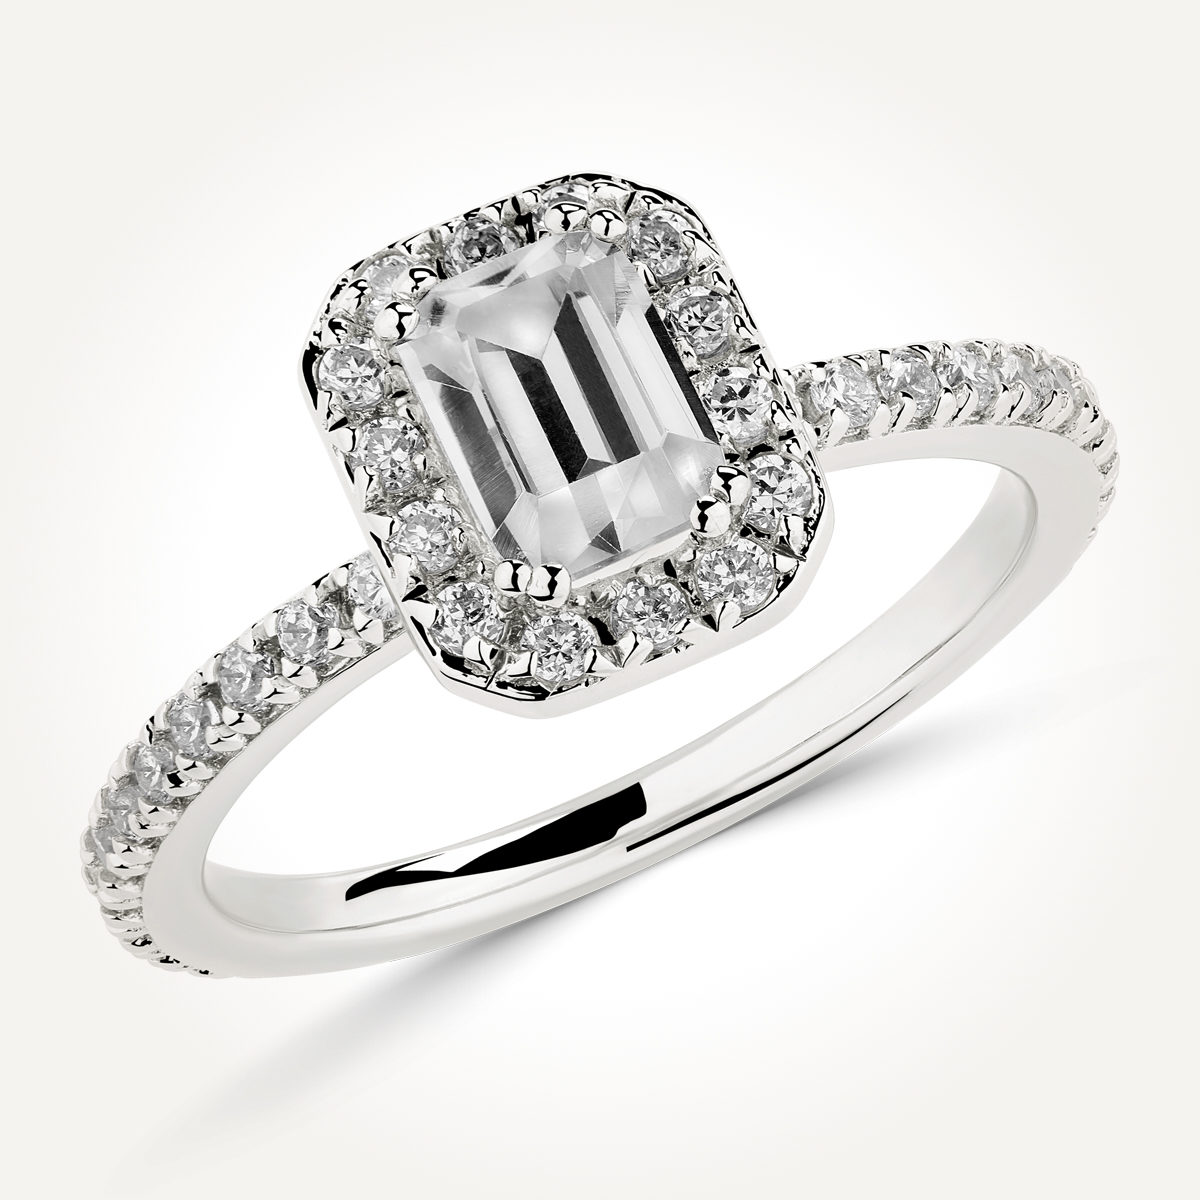 Halo Engagement Ring - 7905 A